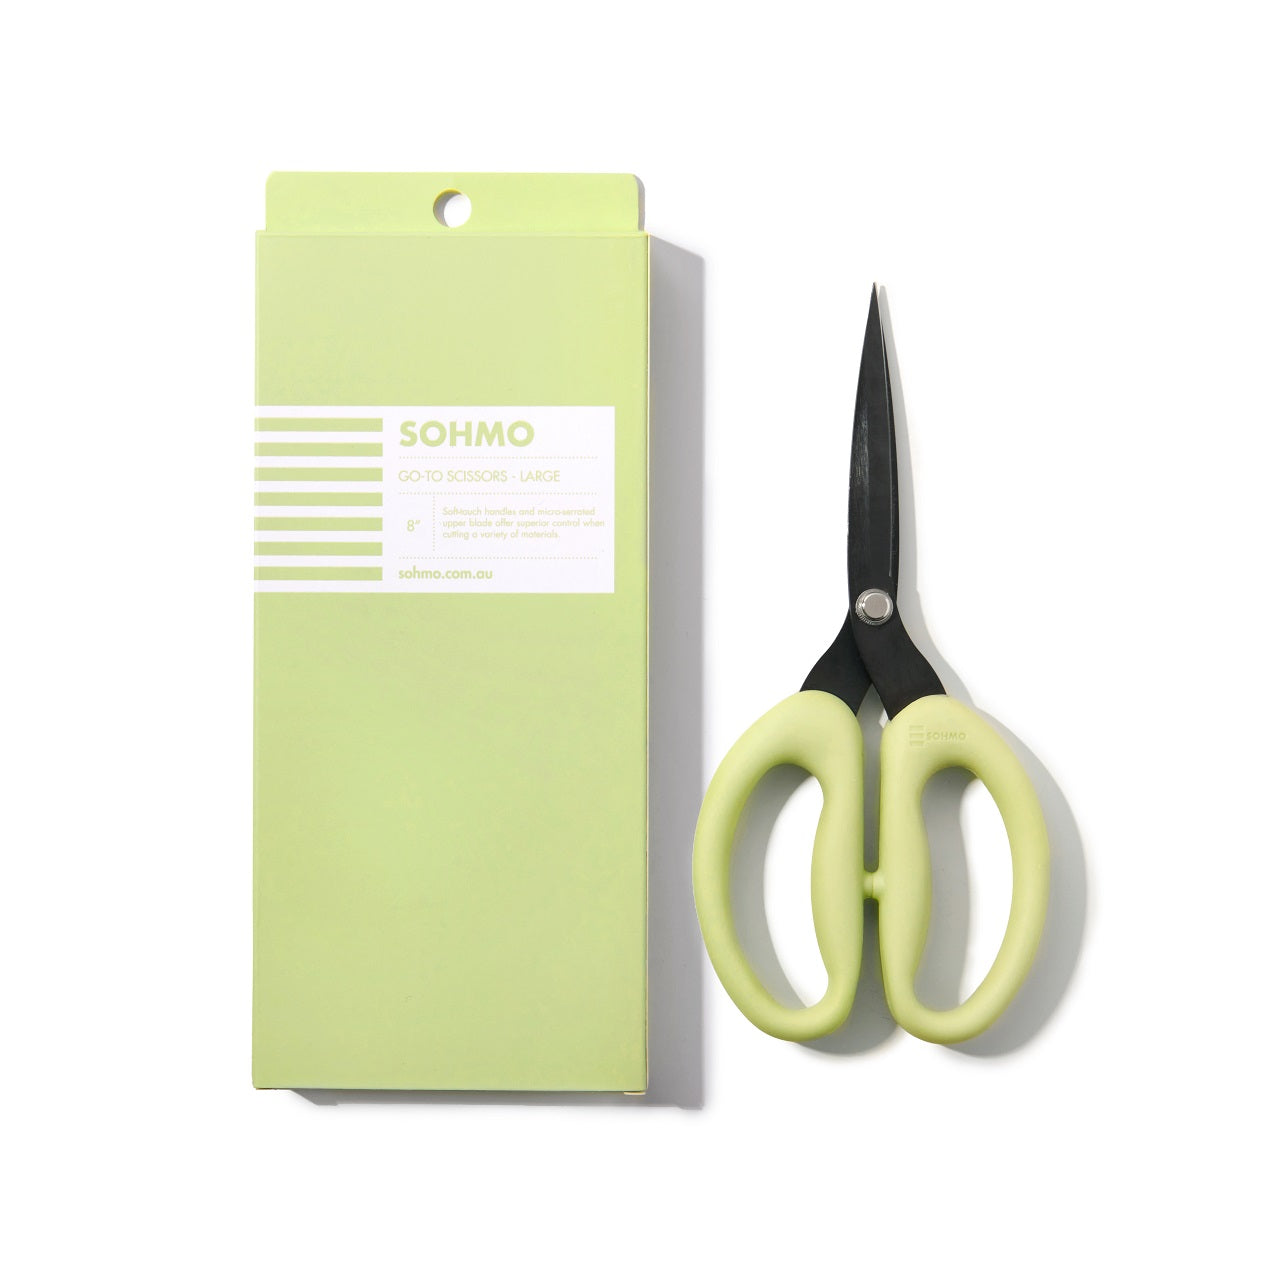 SOHMO Go-To Scissors - Large Green with serrated blades